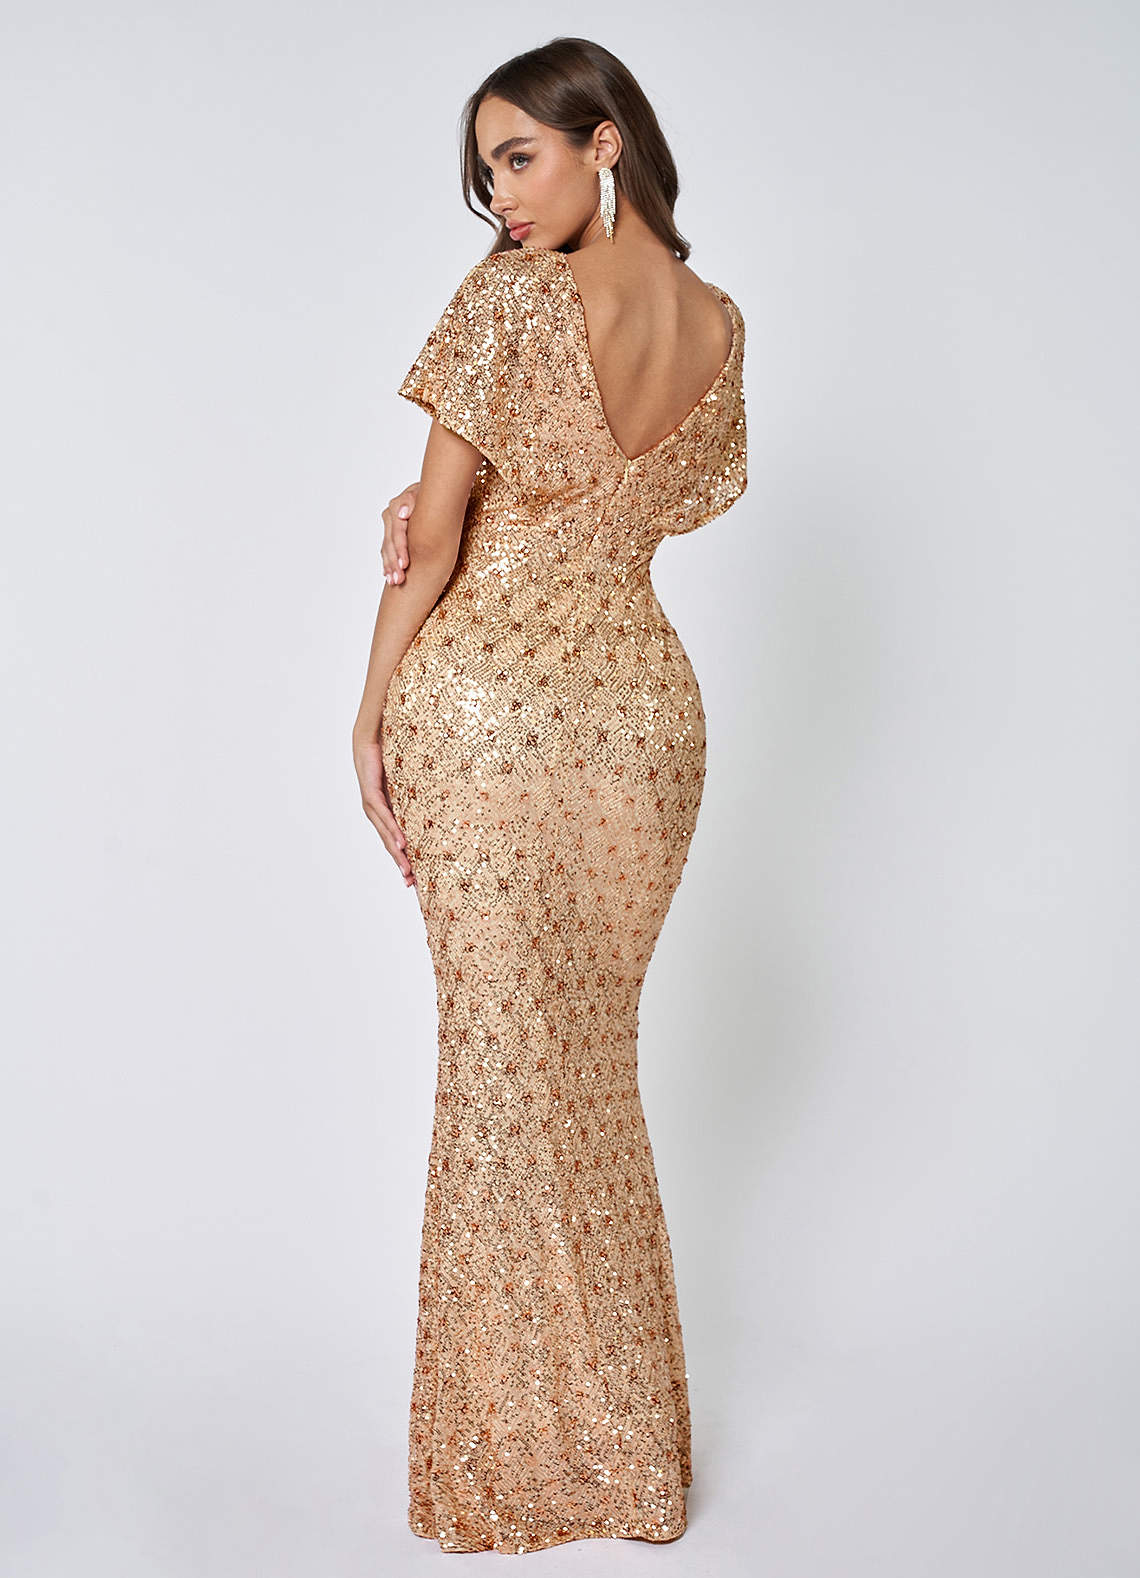 Glam Sweetheart Champagne Sequin Maxi Dress image1